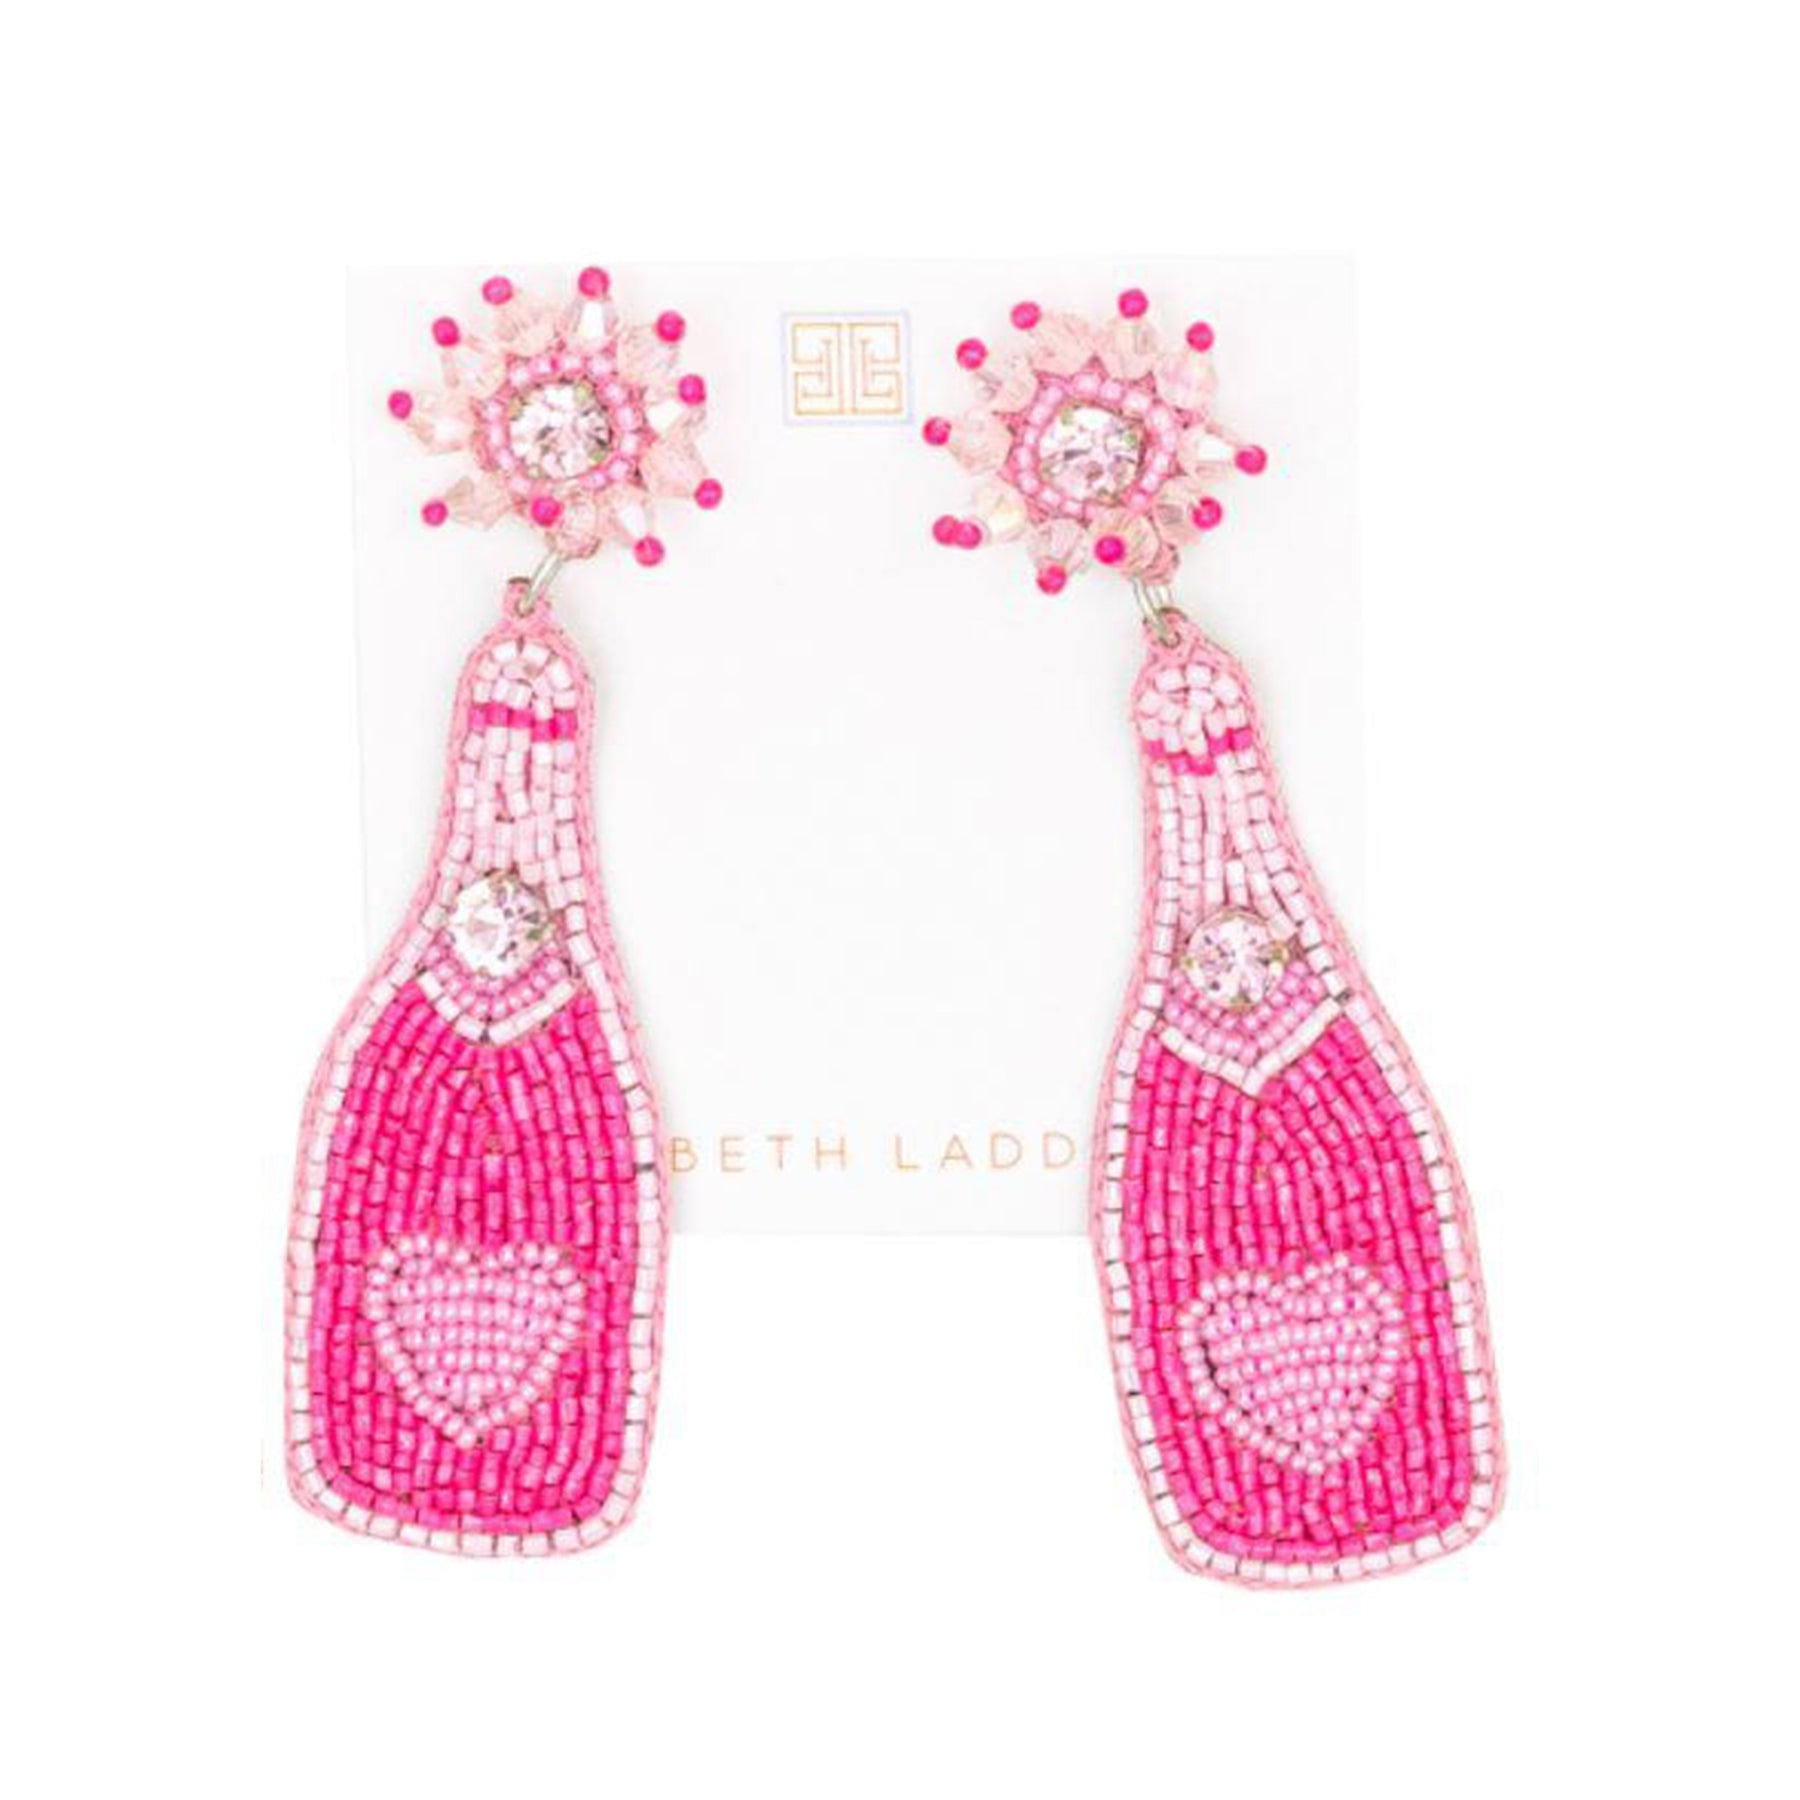 Hot Pink/Light Pink Champagne Earrings